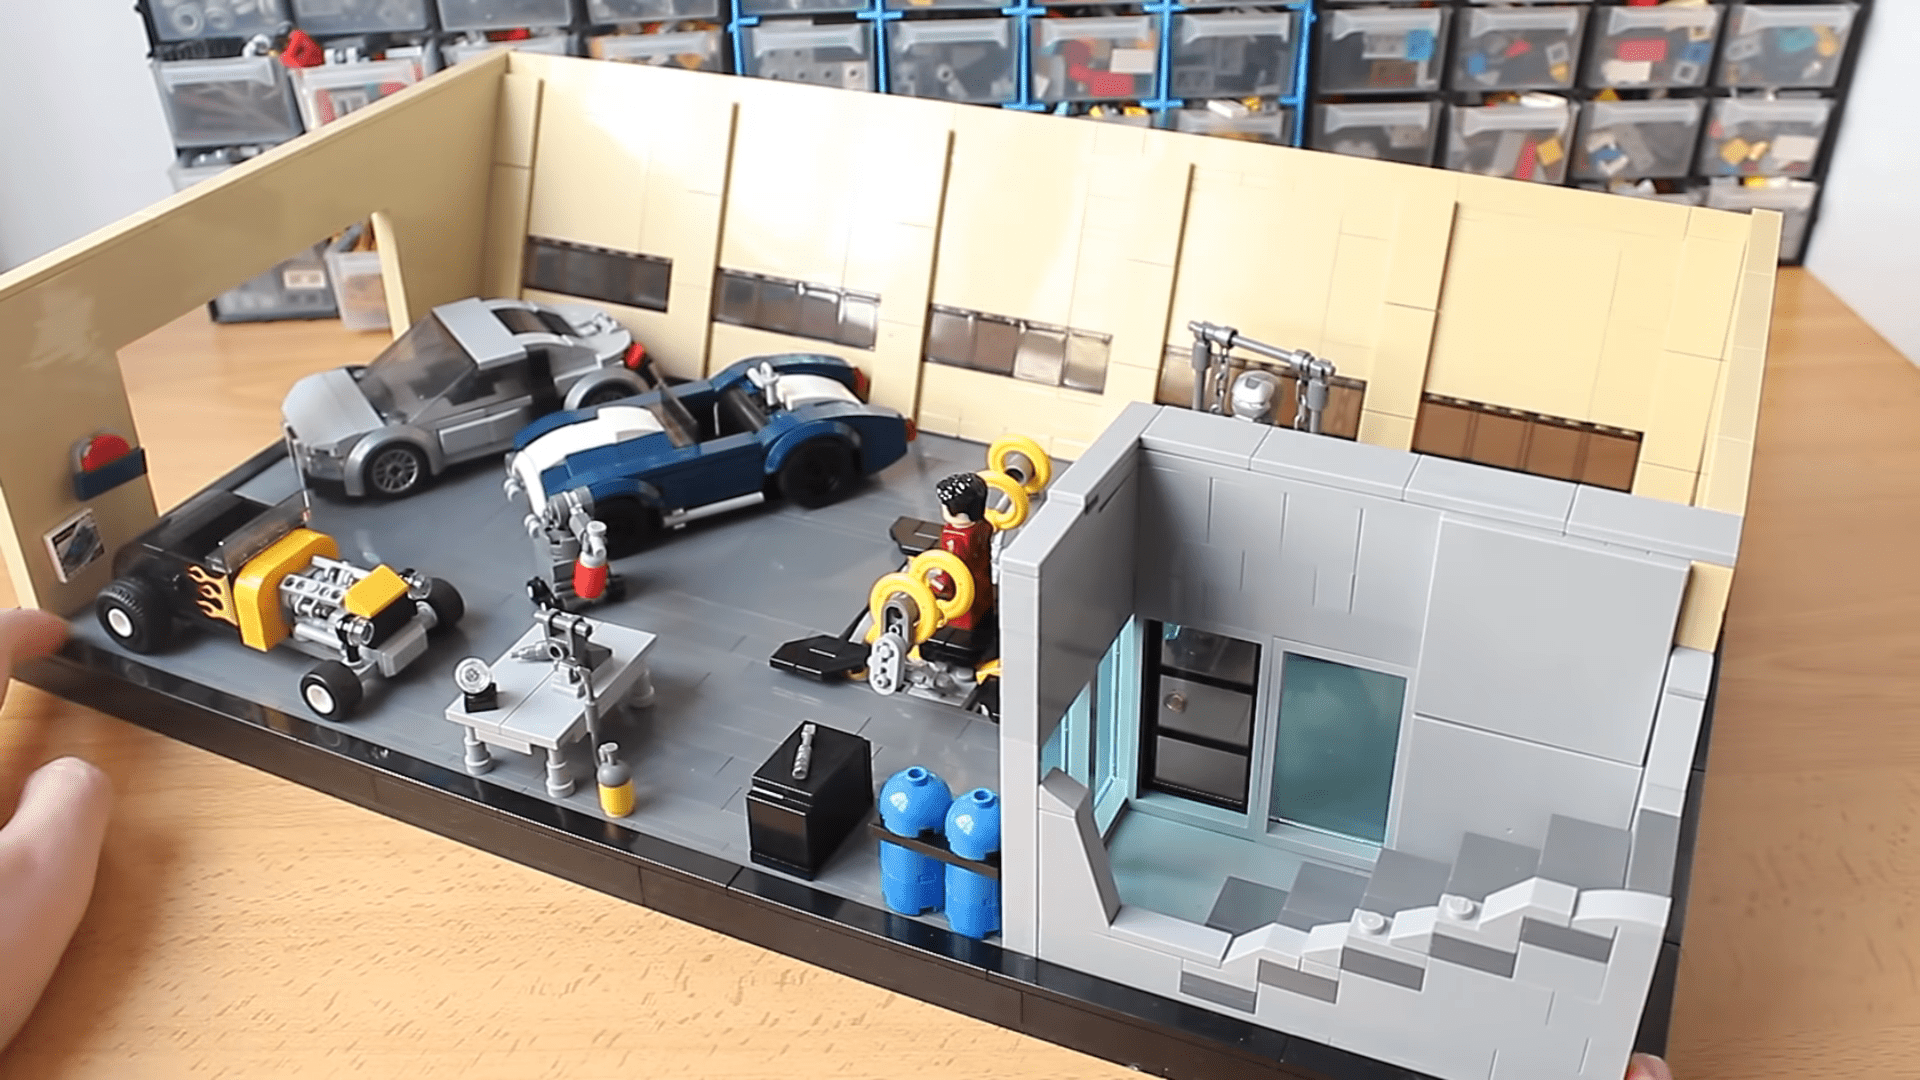 This Fan-Made LEGO Iron Man Garage Has Some Great Models Of The Audi R8 And AC Cobra